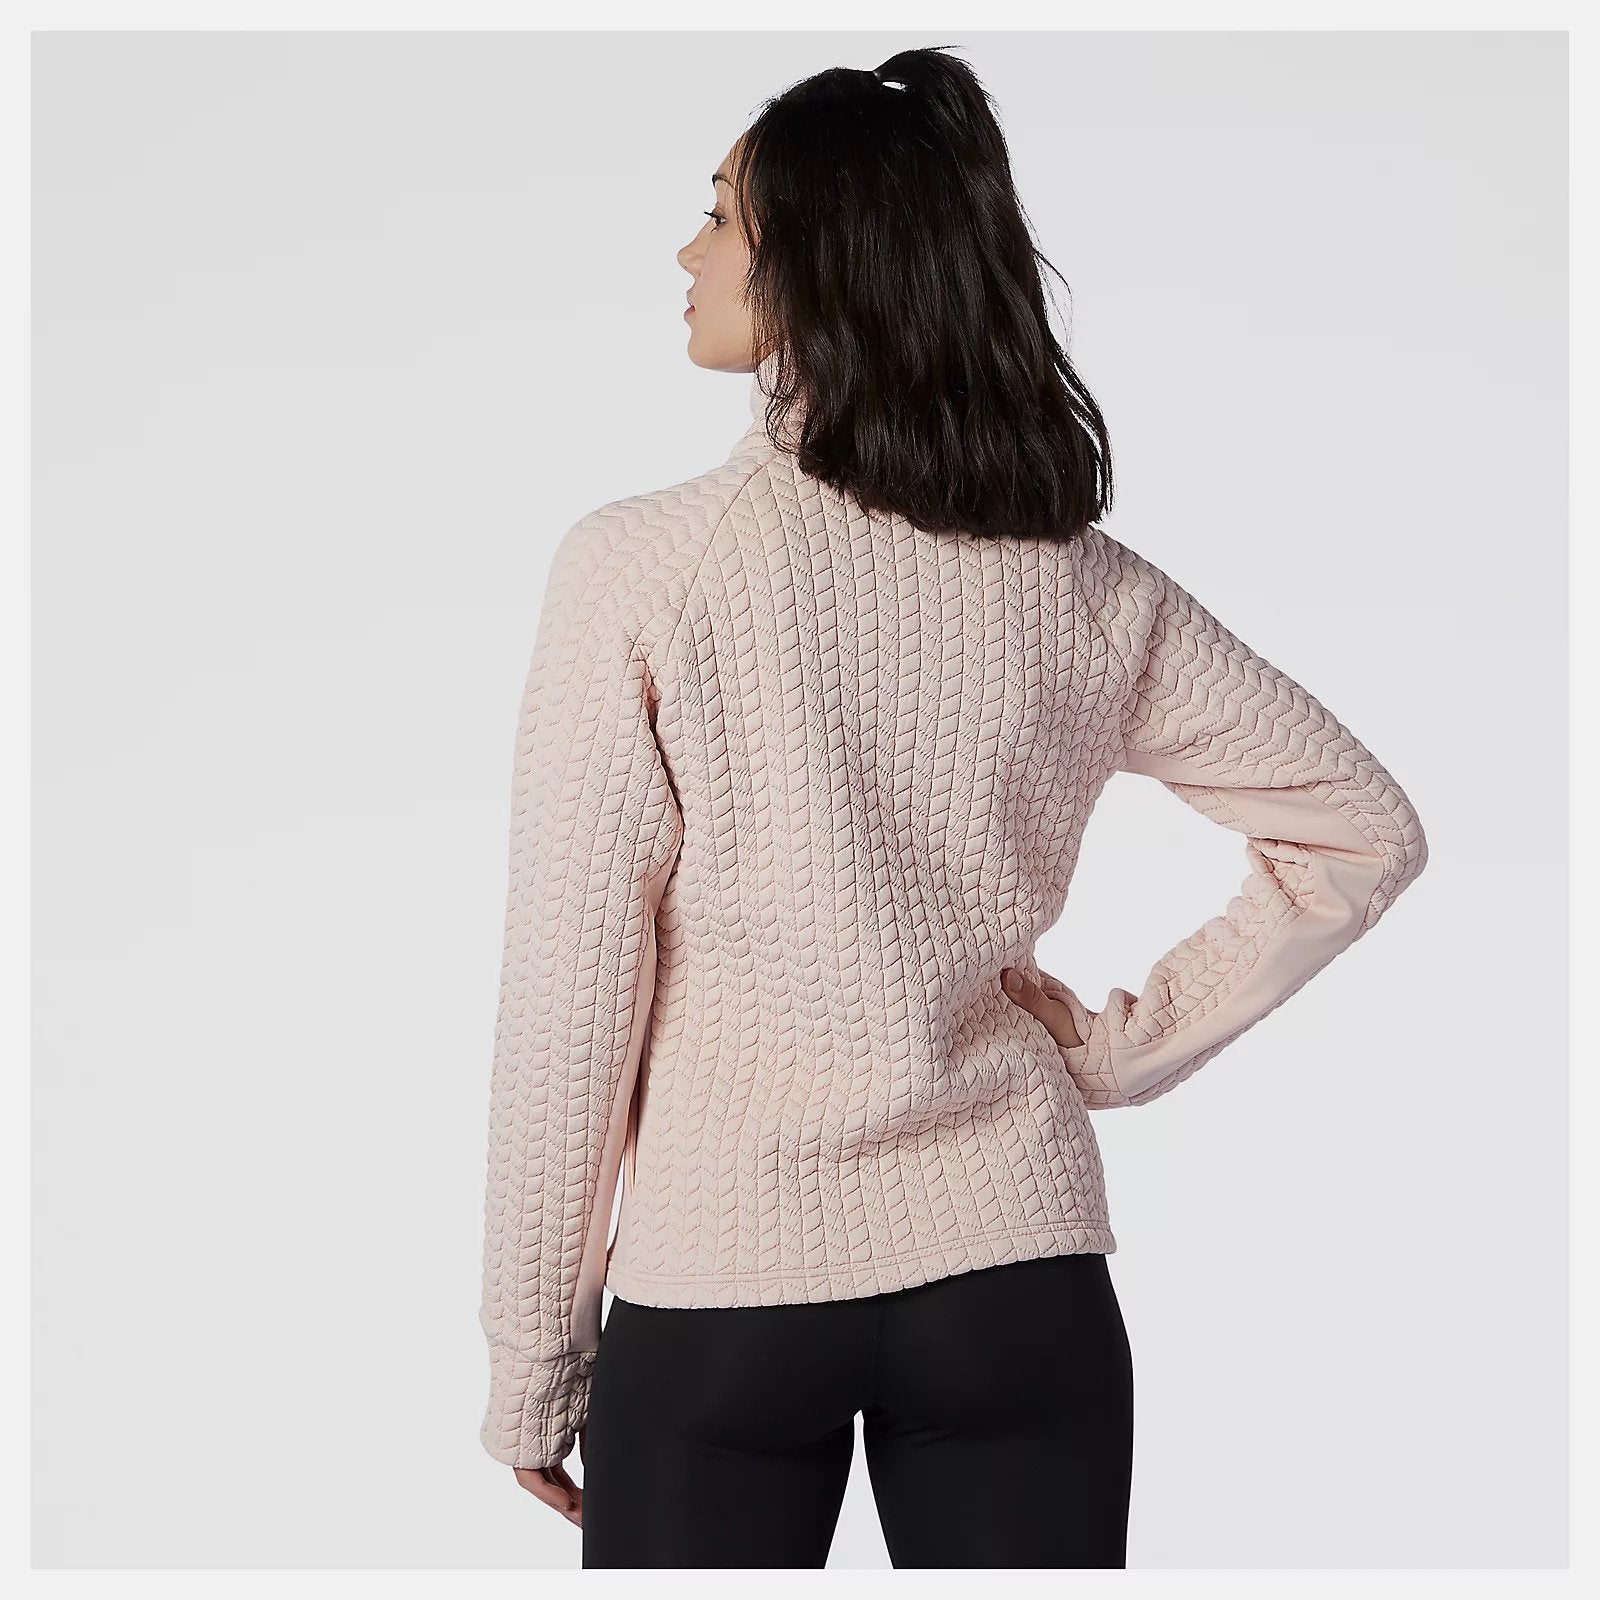 Back view of a model wearing the Women's Heatloft Athletic Jacket in the color Oyster Pink